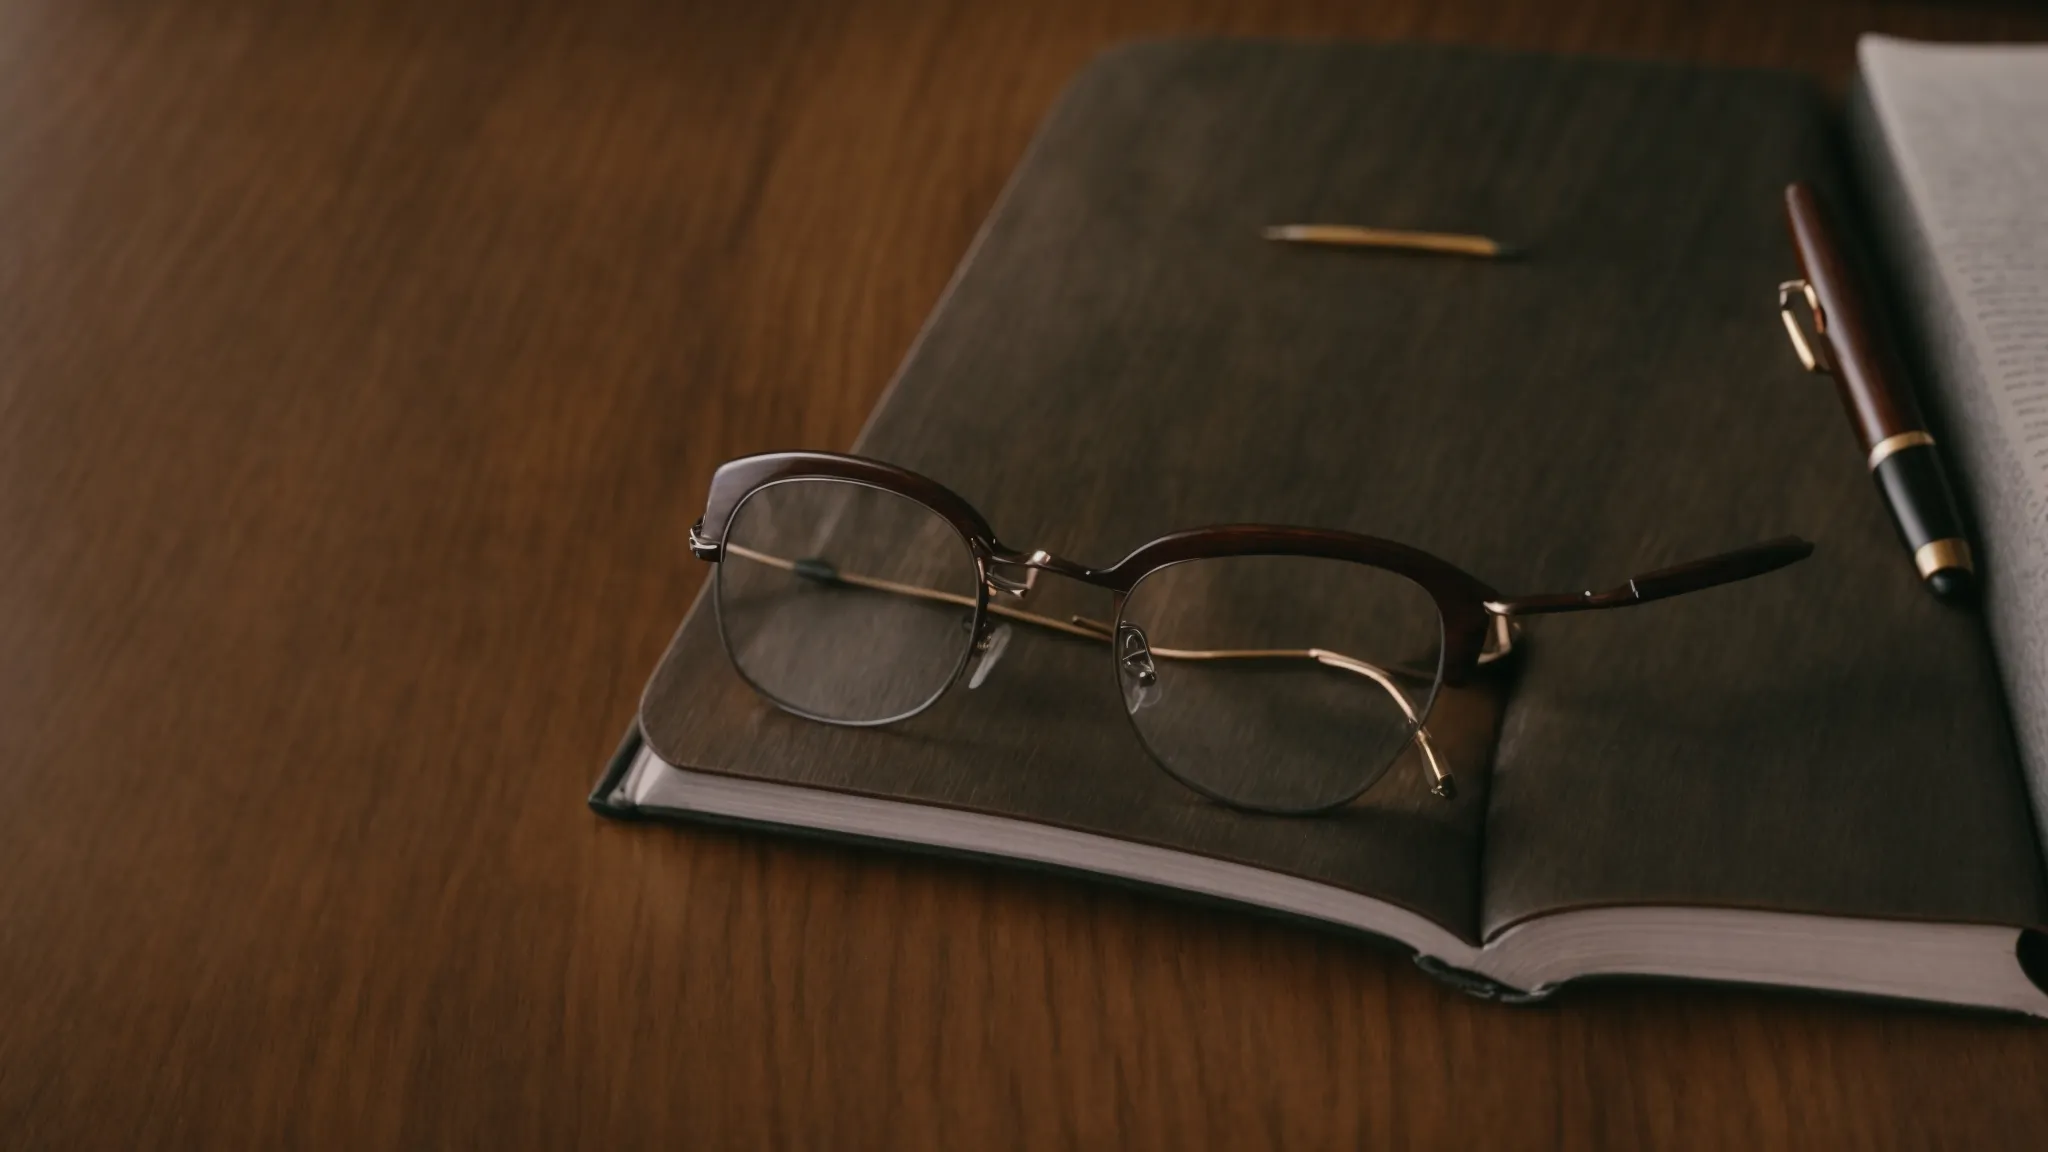 a pair of glasses resting on an open book, with a pen laid alongside atop a wooden desk.